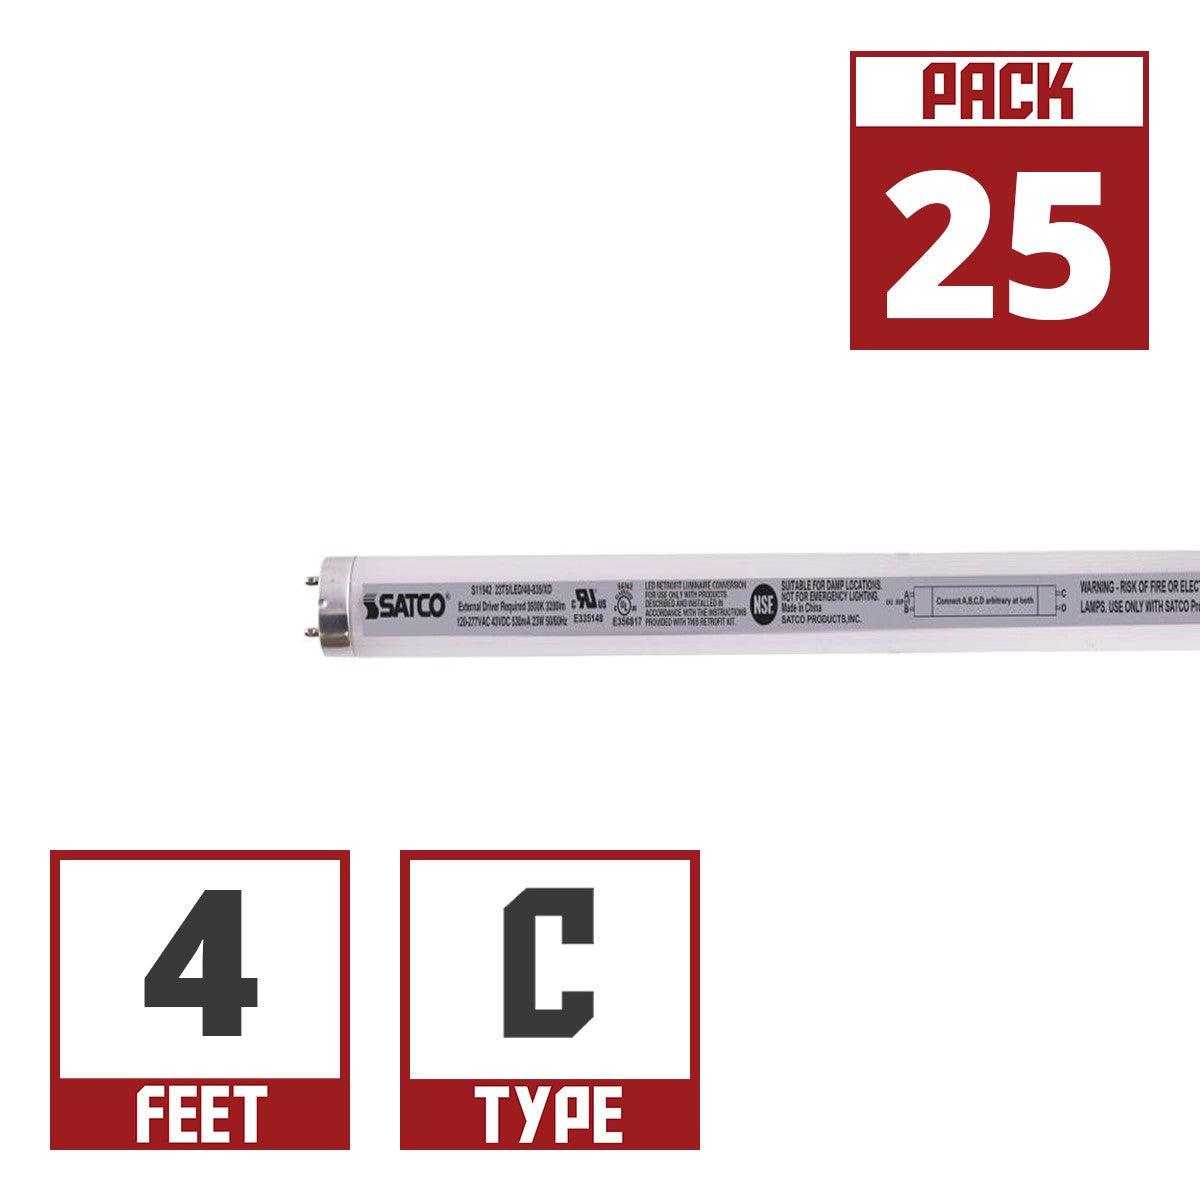 T5 LED Tube, 4ft, Frosted, Plug & Play, Type A, 25W, 3500 Lumens